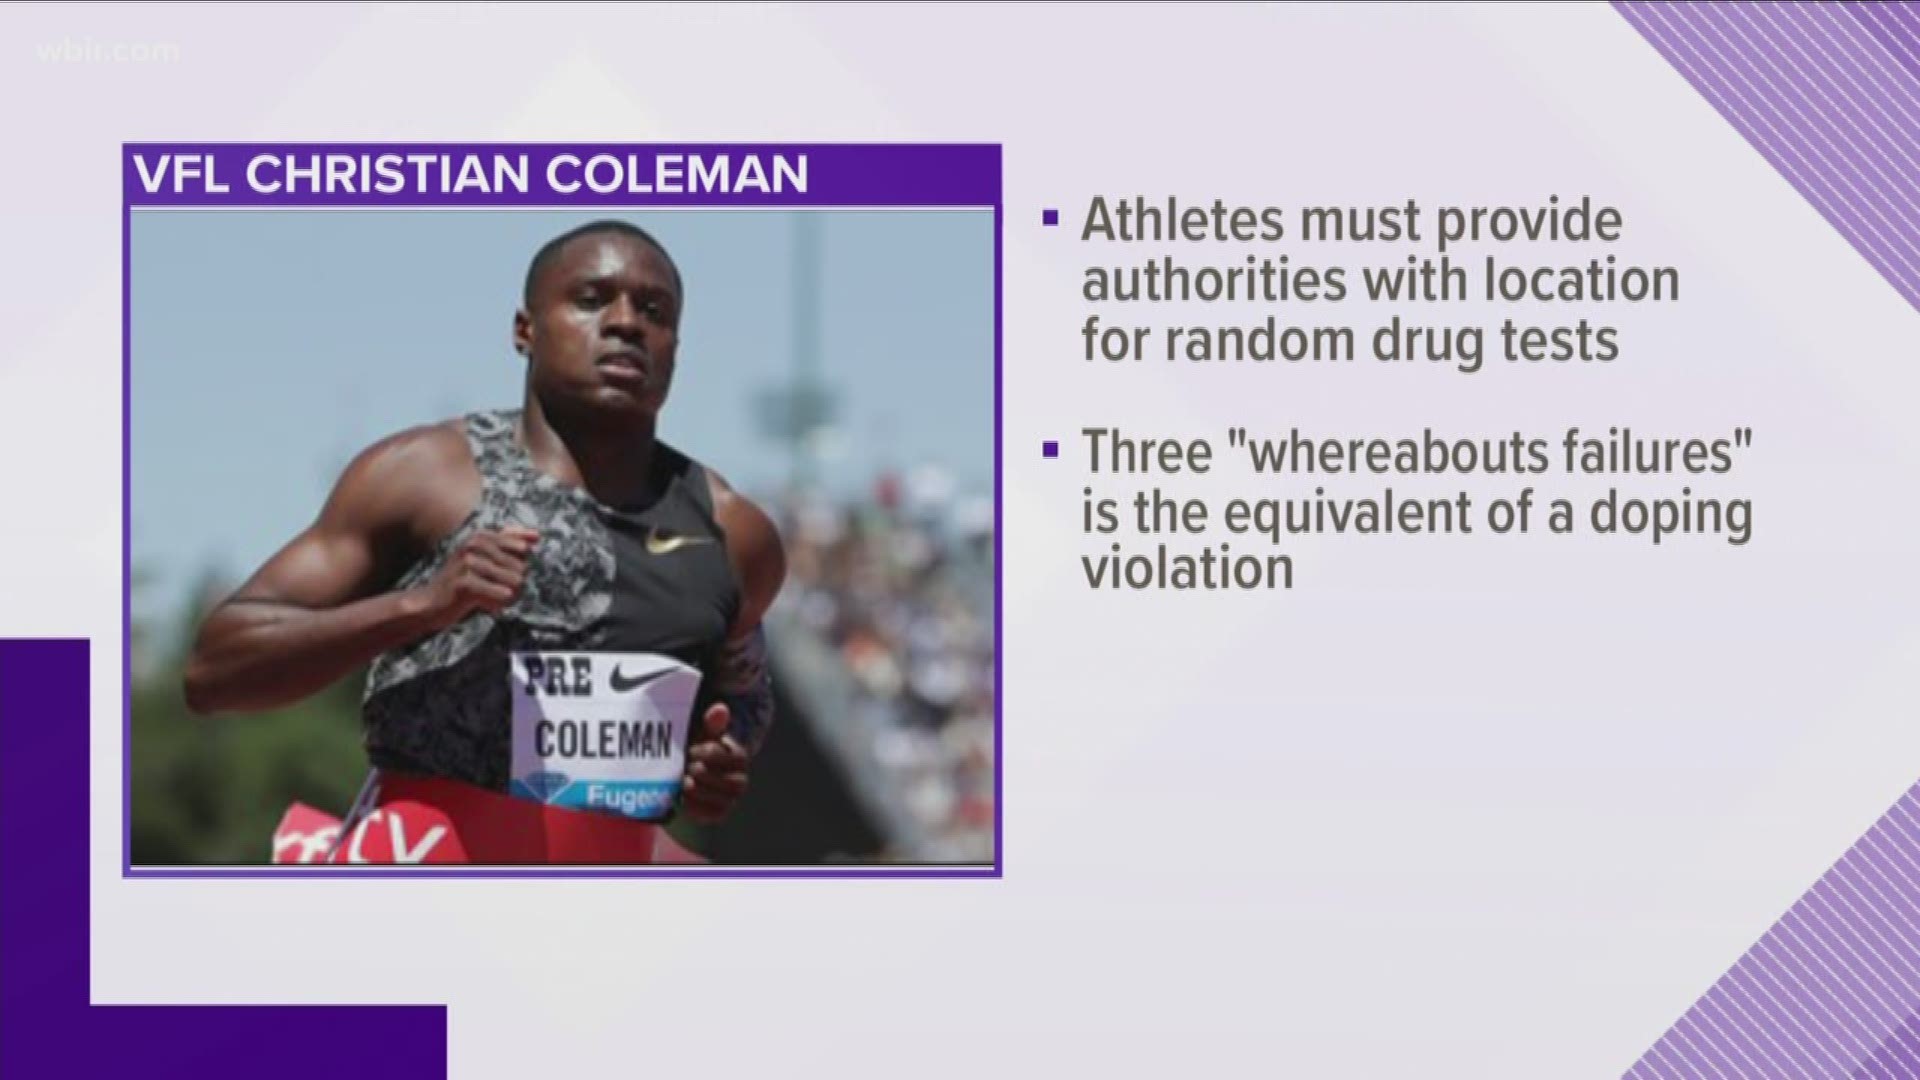 Sources say the UT grad and reigning national champion at the 100 meters has missed three drug tests over the past year.